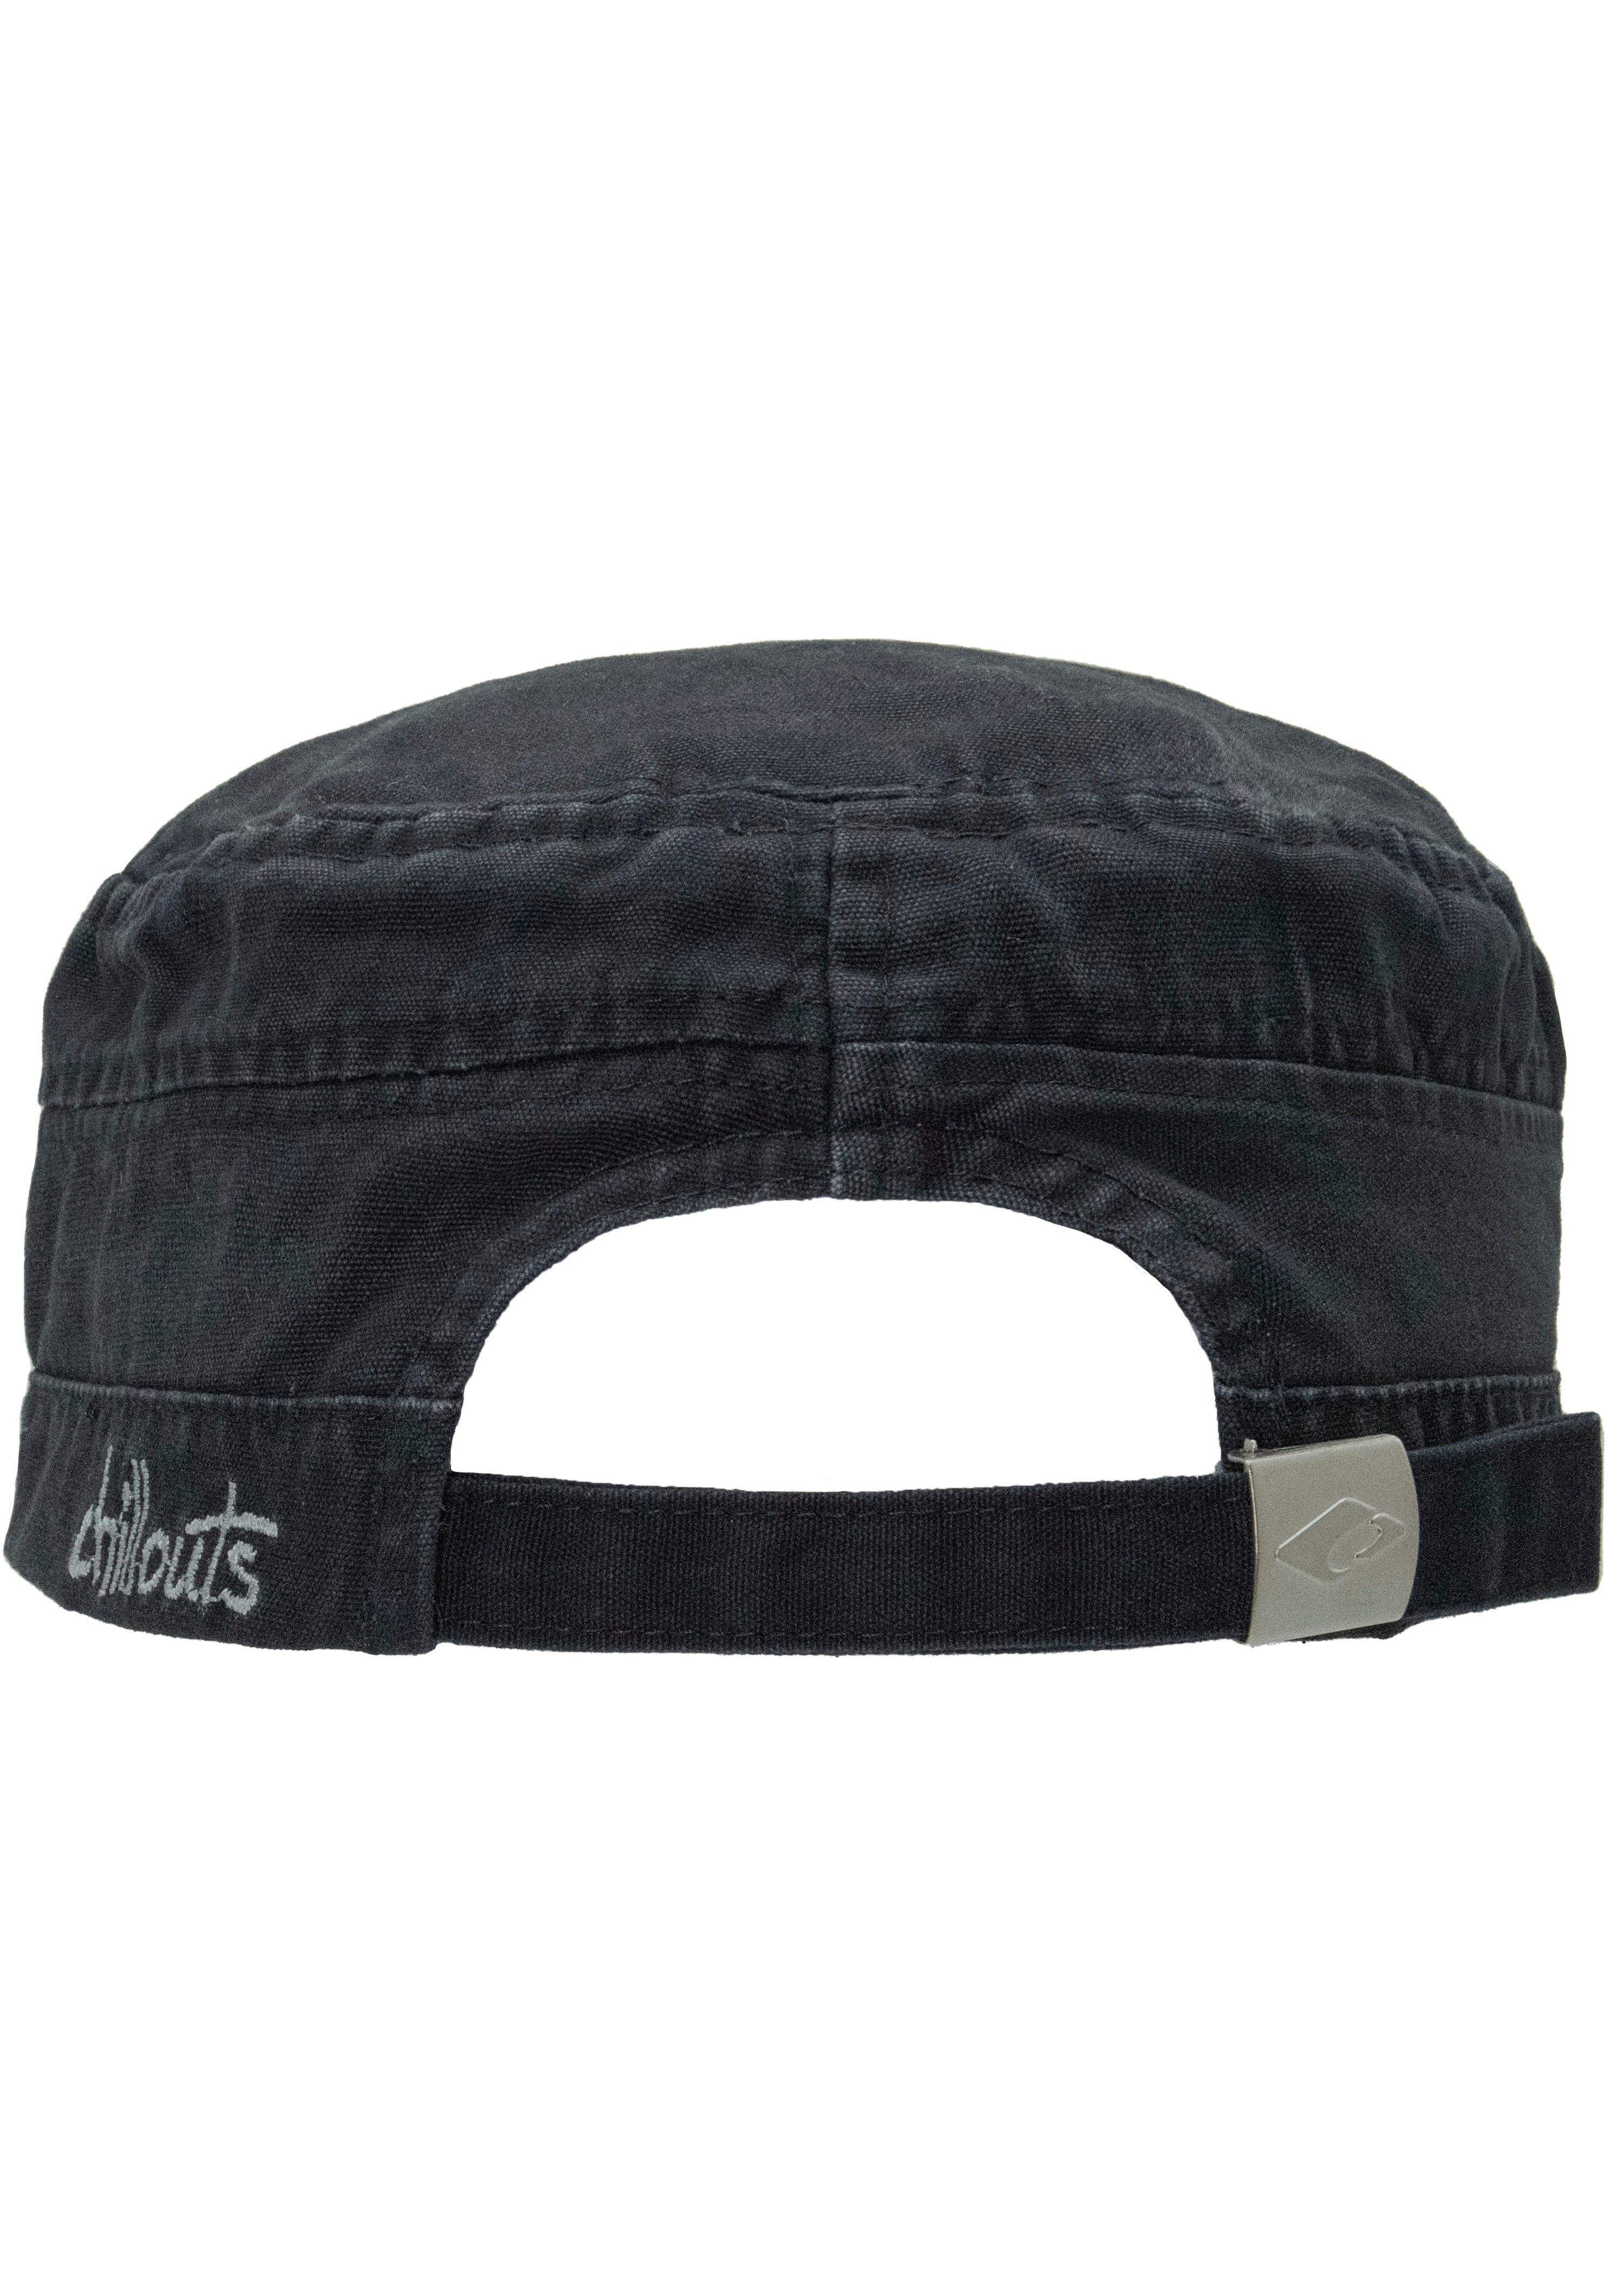 chillouts Army Cap El washed Size atmungsaktiv, reiner navy aus One Hat Paso Baumwolle